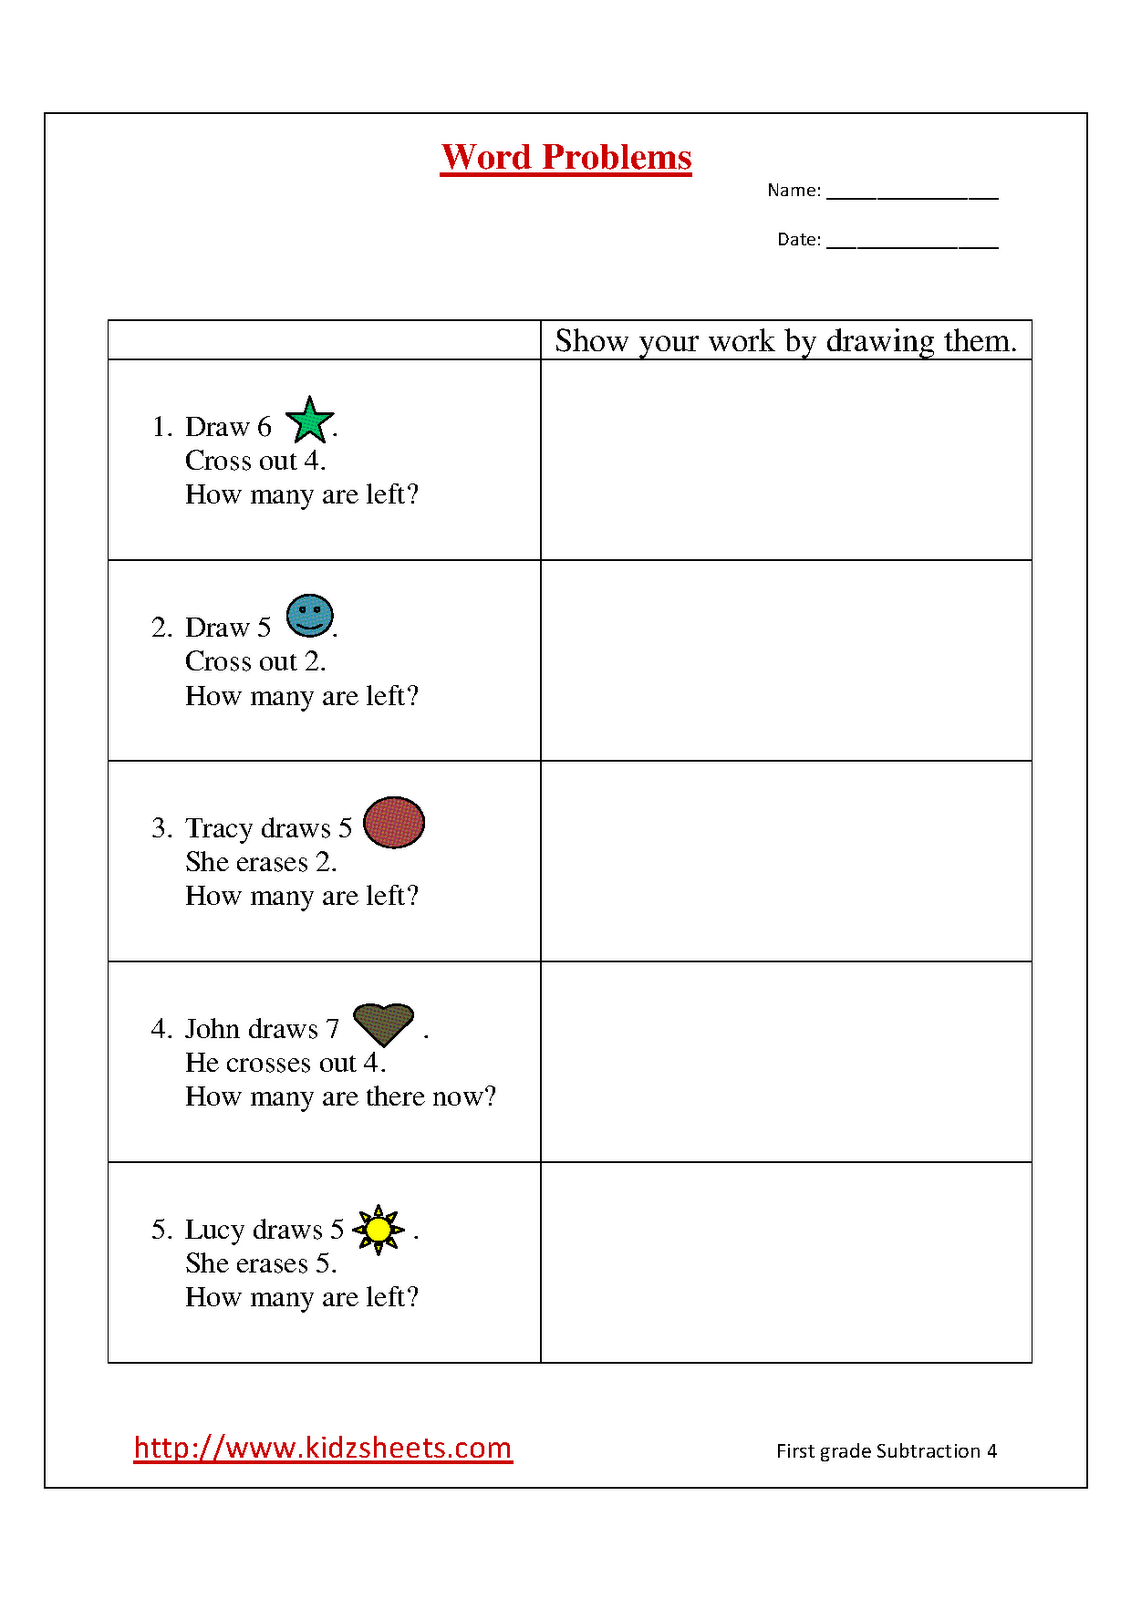 7 Best Images of Create Your Own Subtraction Worksheet - Blank Fact